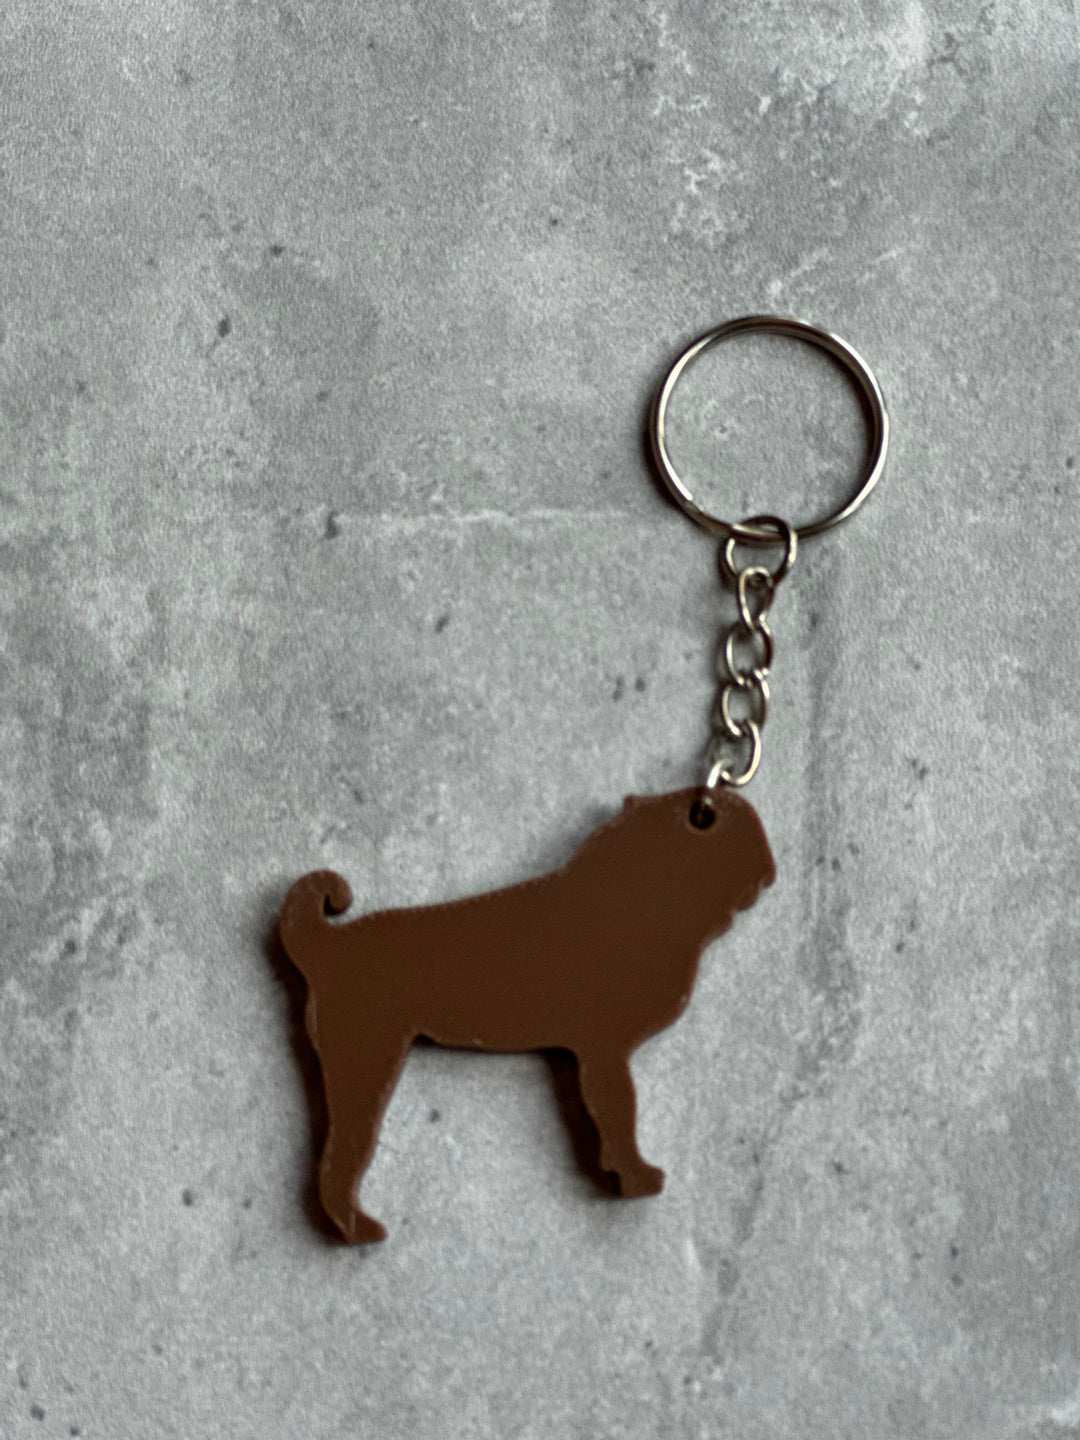 Pug Keyring Stl File | 3D Printed | UNique Personalised Gifts